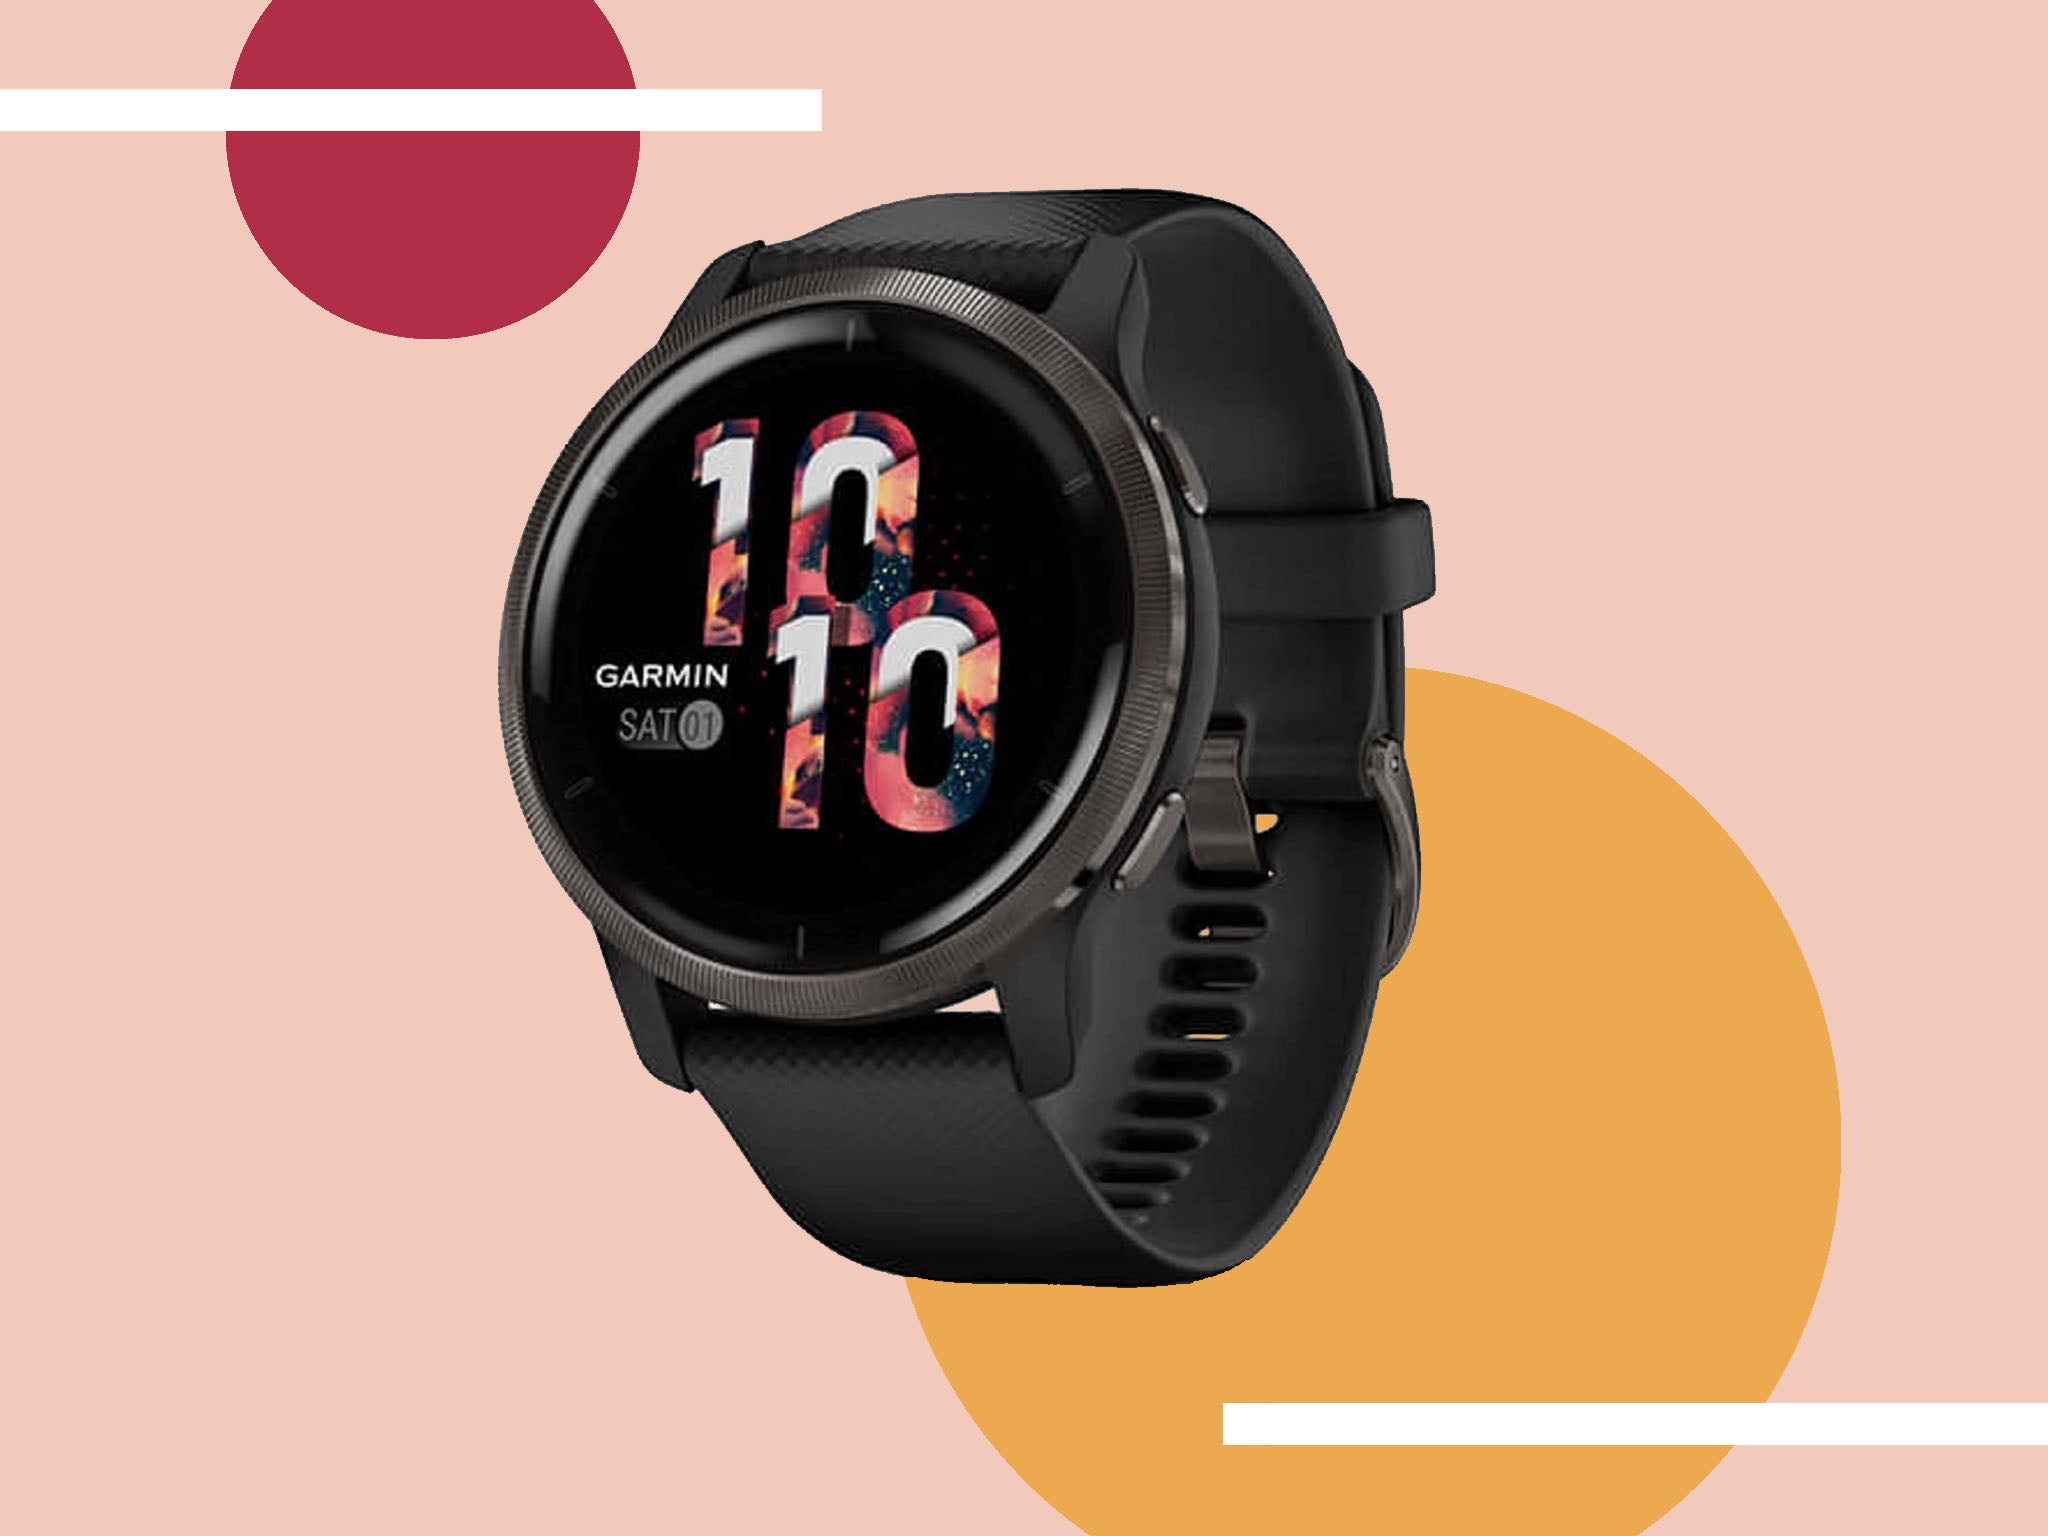 The smartwatch has advanced health monitoring and fitness features to help you better understand your body